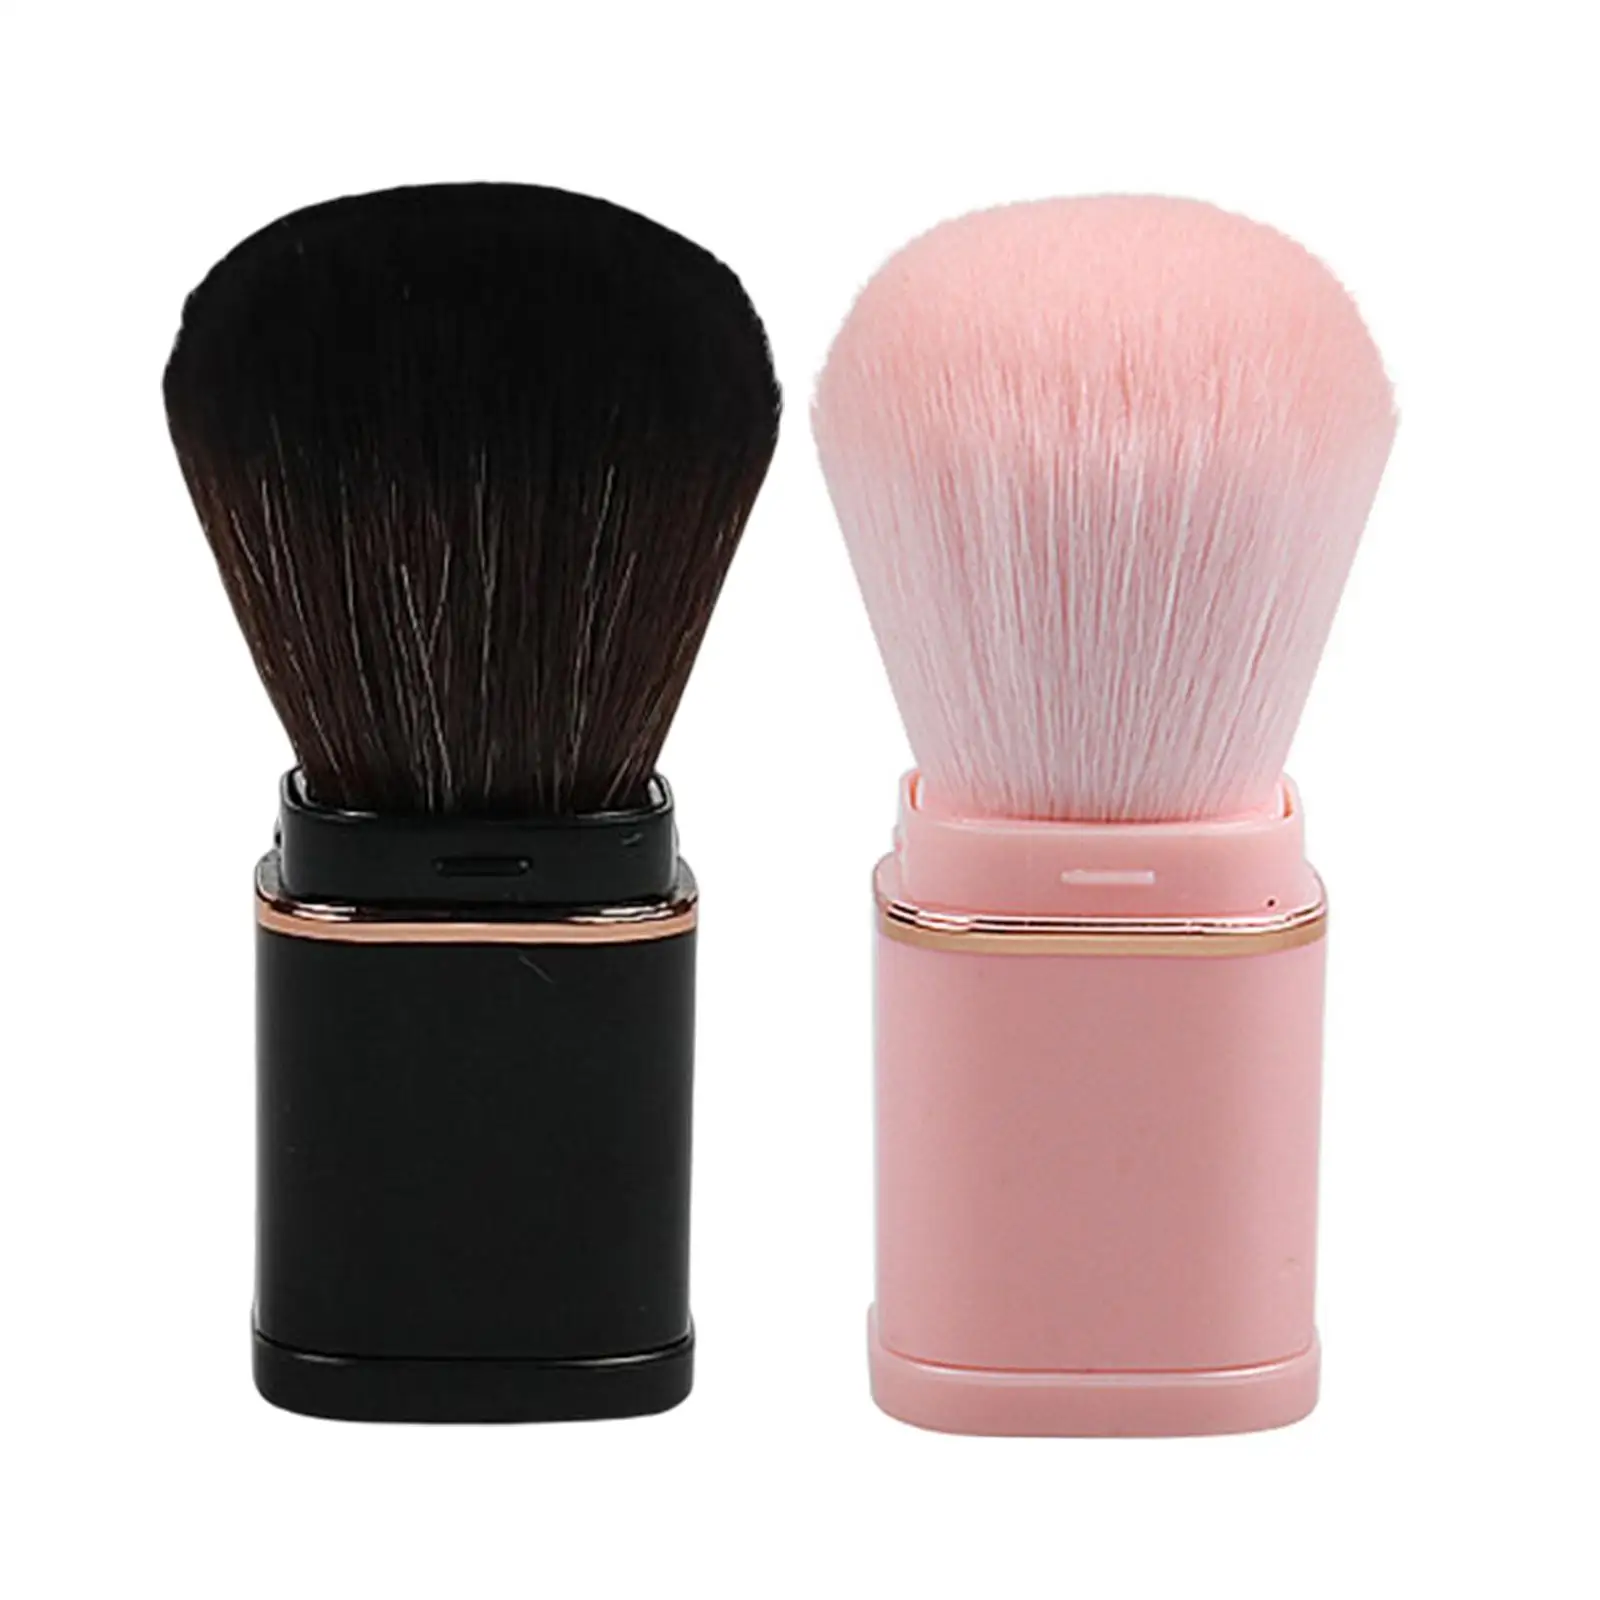 Portable Retractable Makeup Brush with Cover Small Blush Brush for Powder Bronzer Buffing Highlighter Blush